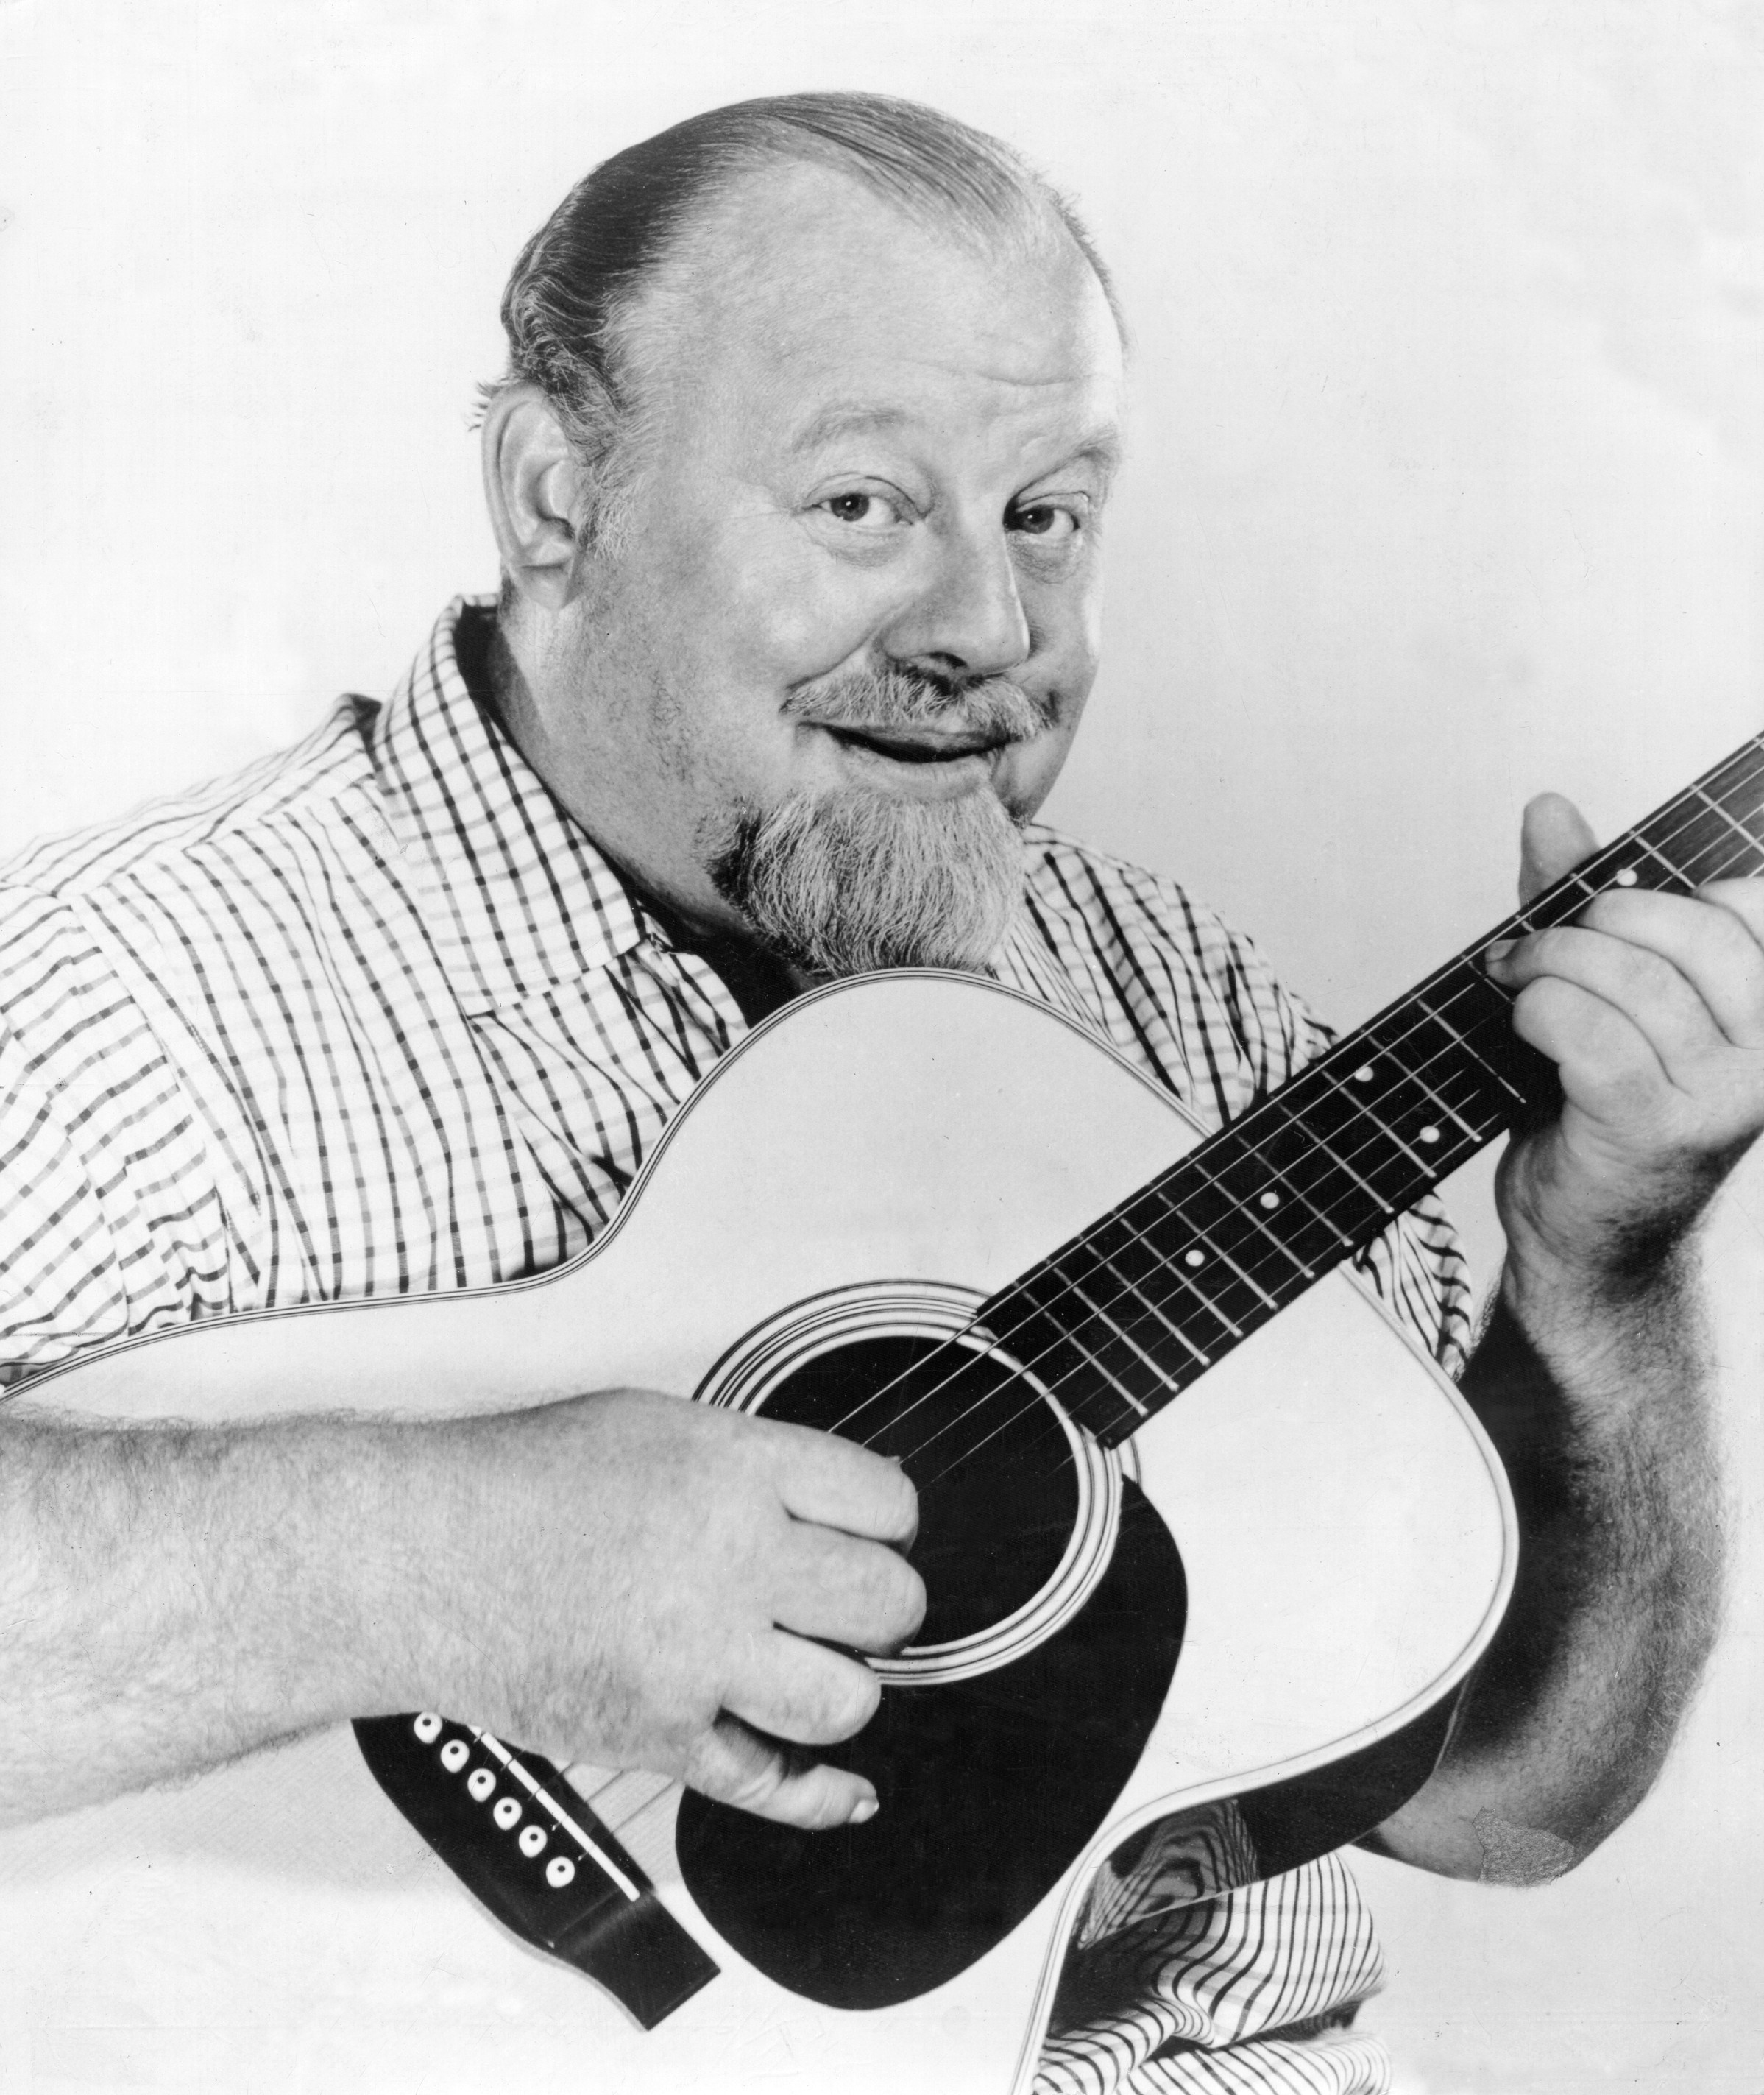 An older man with a receding hairline, large goatee, and mustache playing guitar